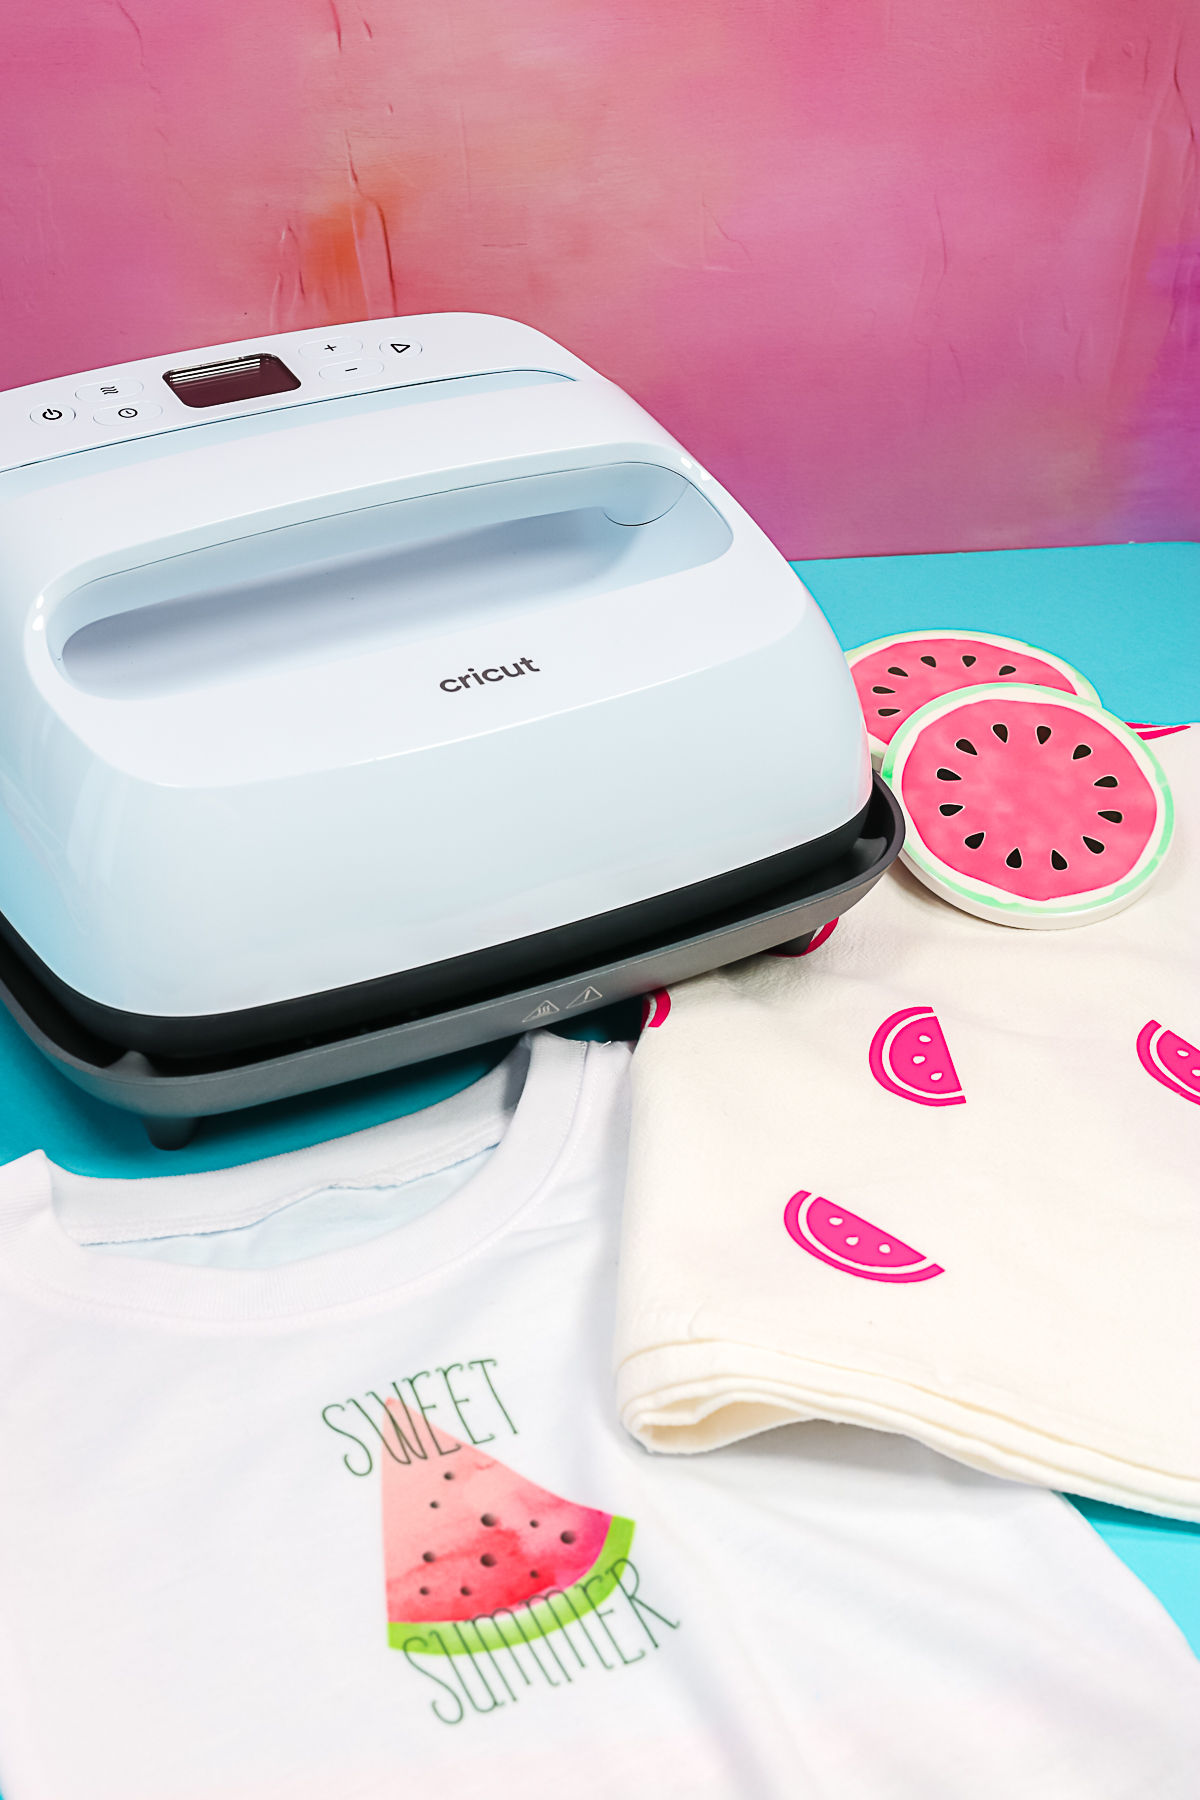 Cricut review: Is Cricut worth the money? - Reviewed